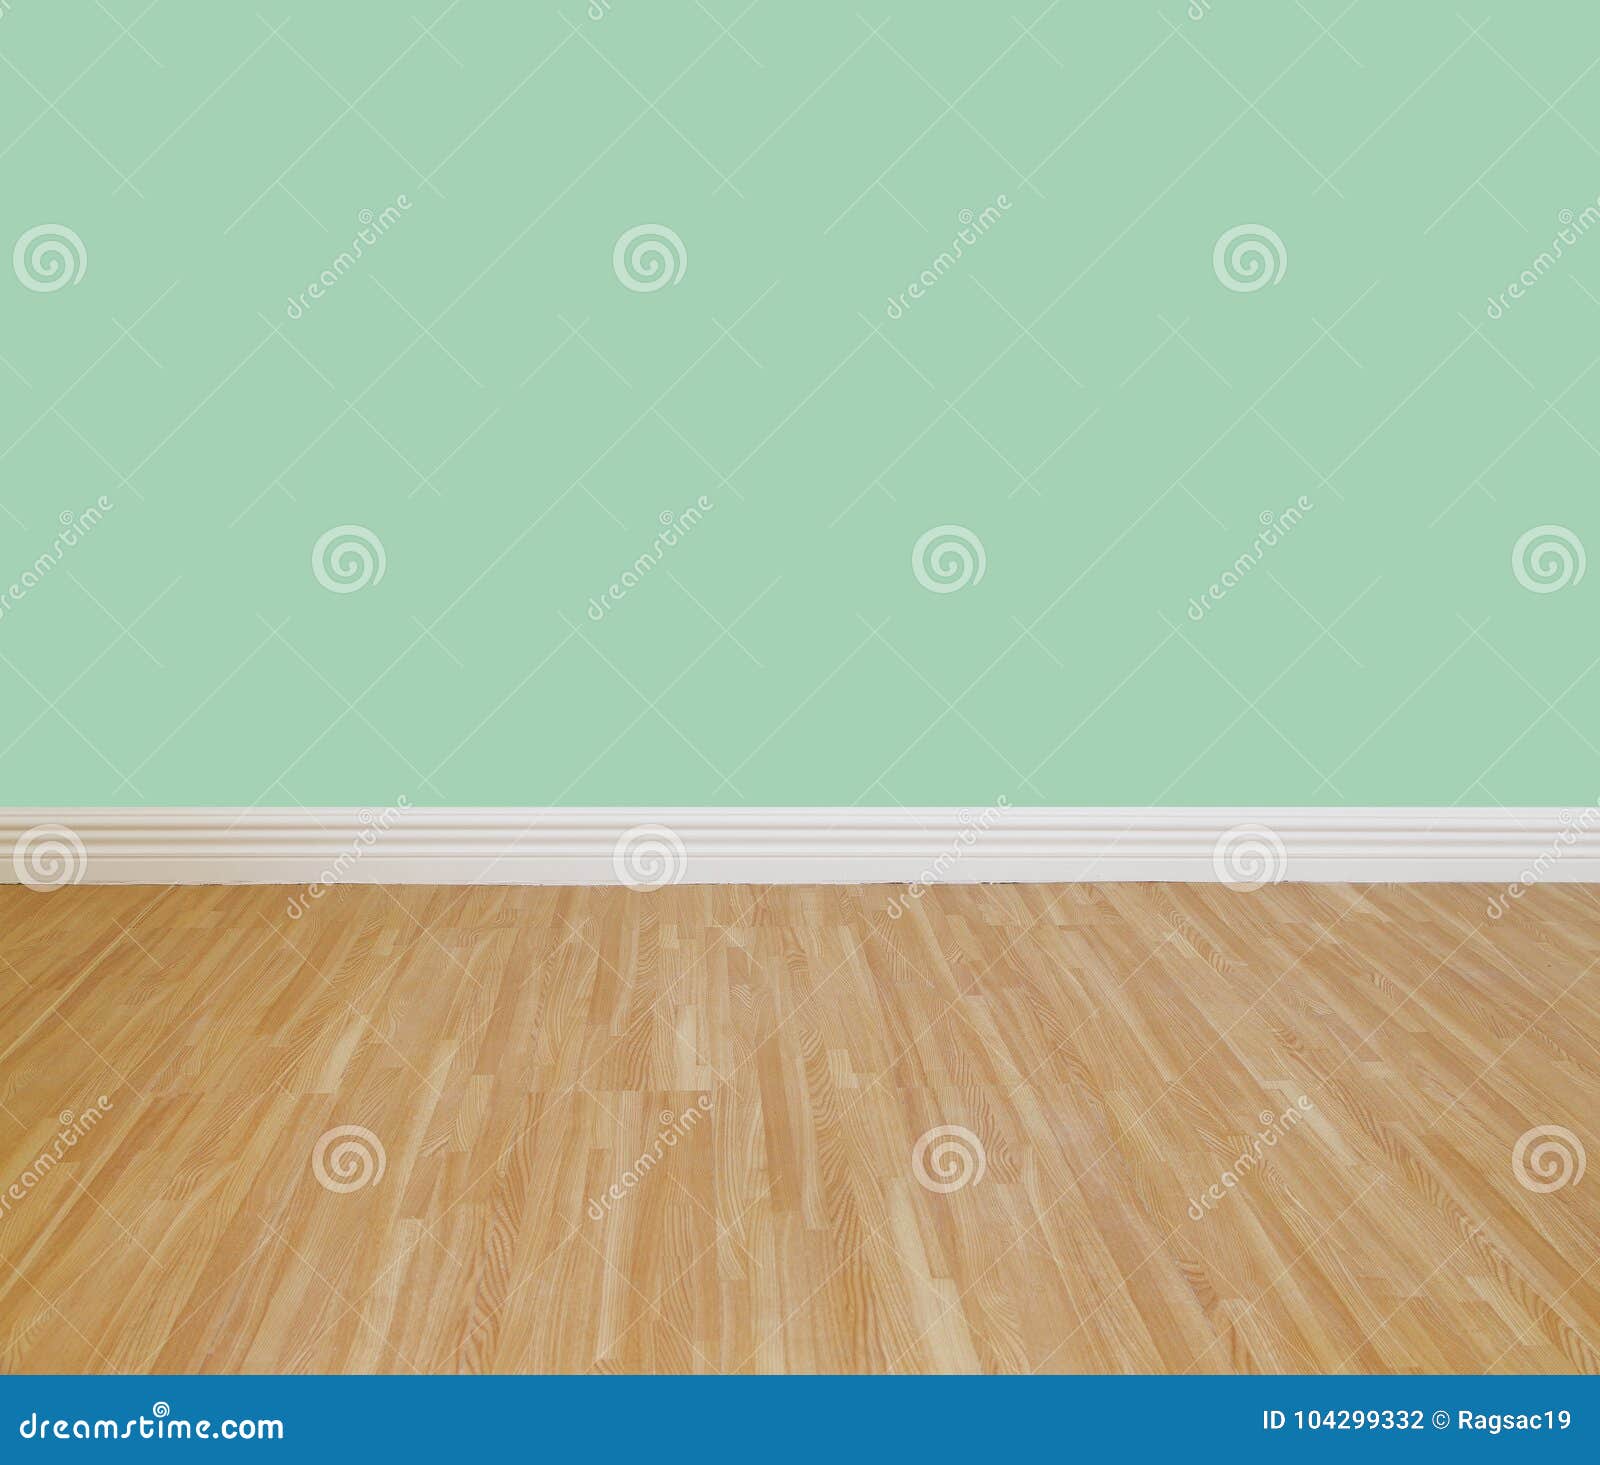 House Wall Painted With Cyan Shade With Wood Design Flooring Stock